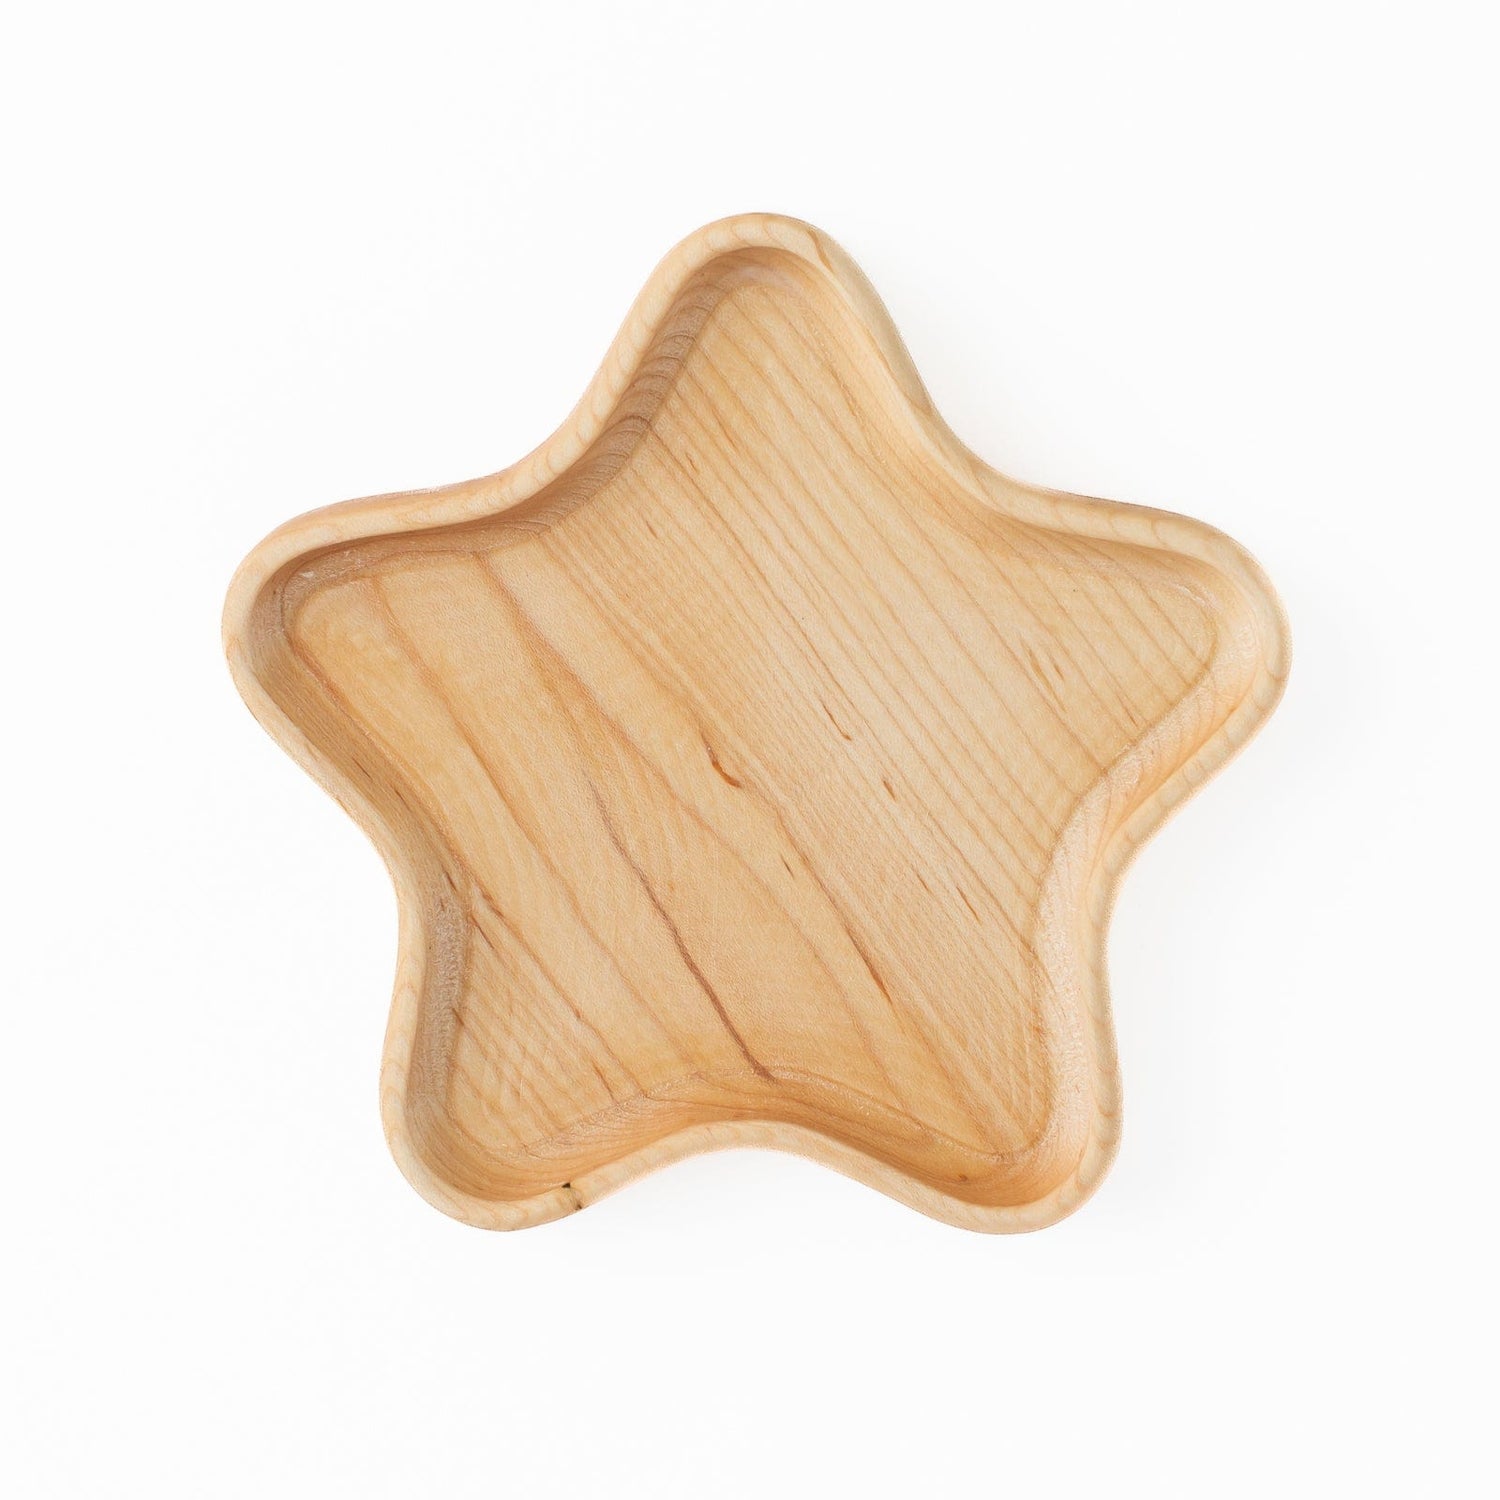 Aw & Co. Sensory Play Wooden Star Plate / Sensory Tray (Made in Canada)